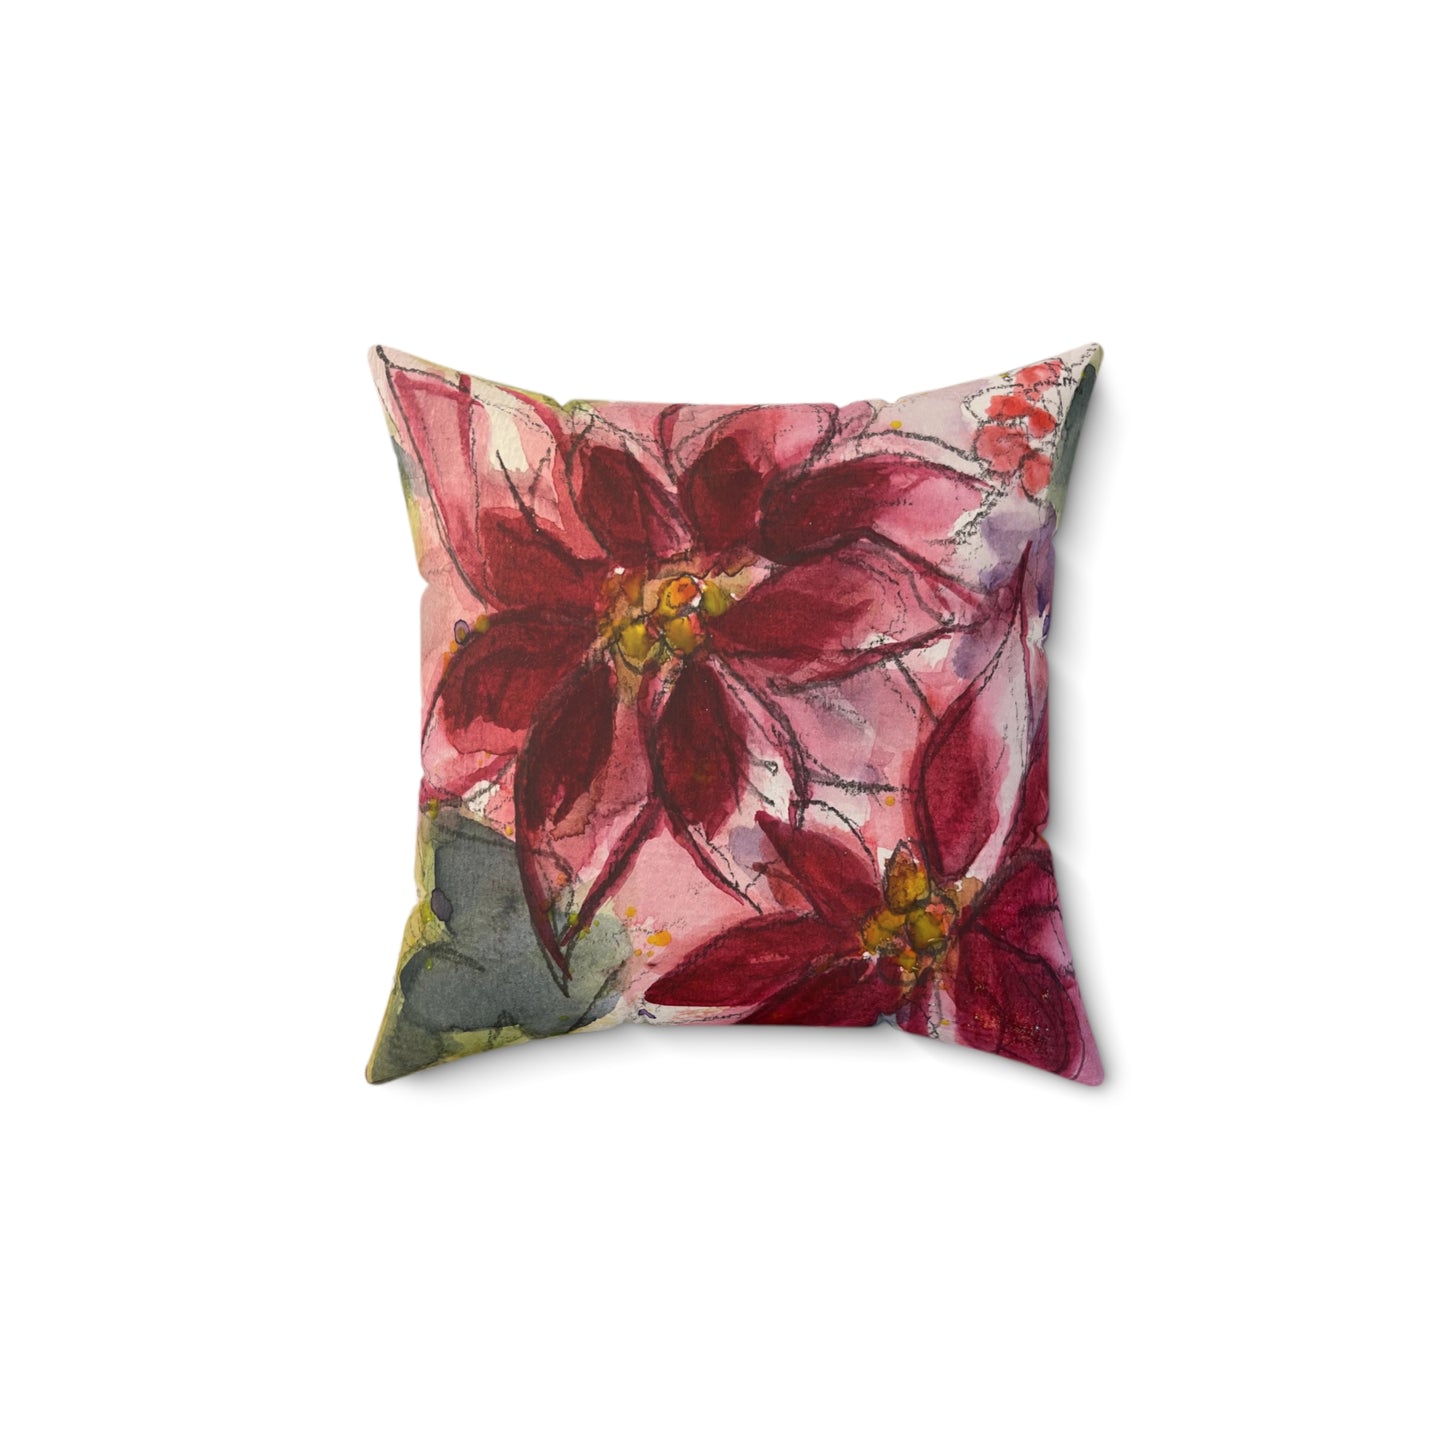 Red Poinsettias Indoor Spun Polyester Square Pillow